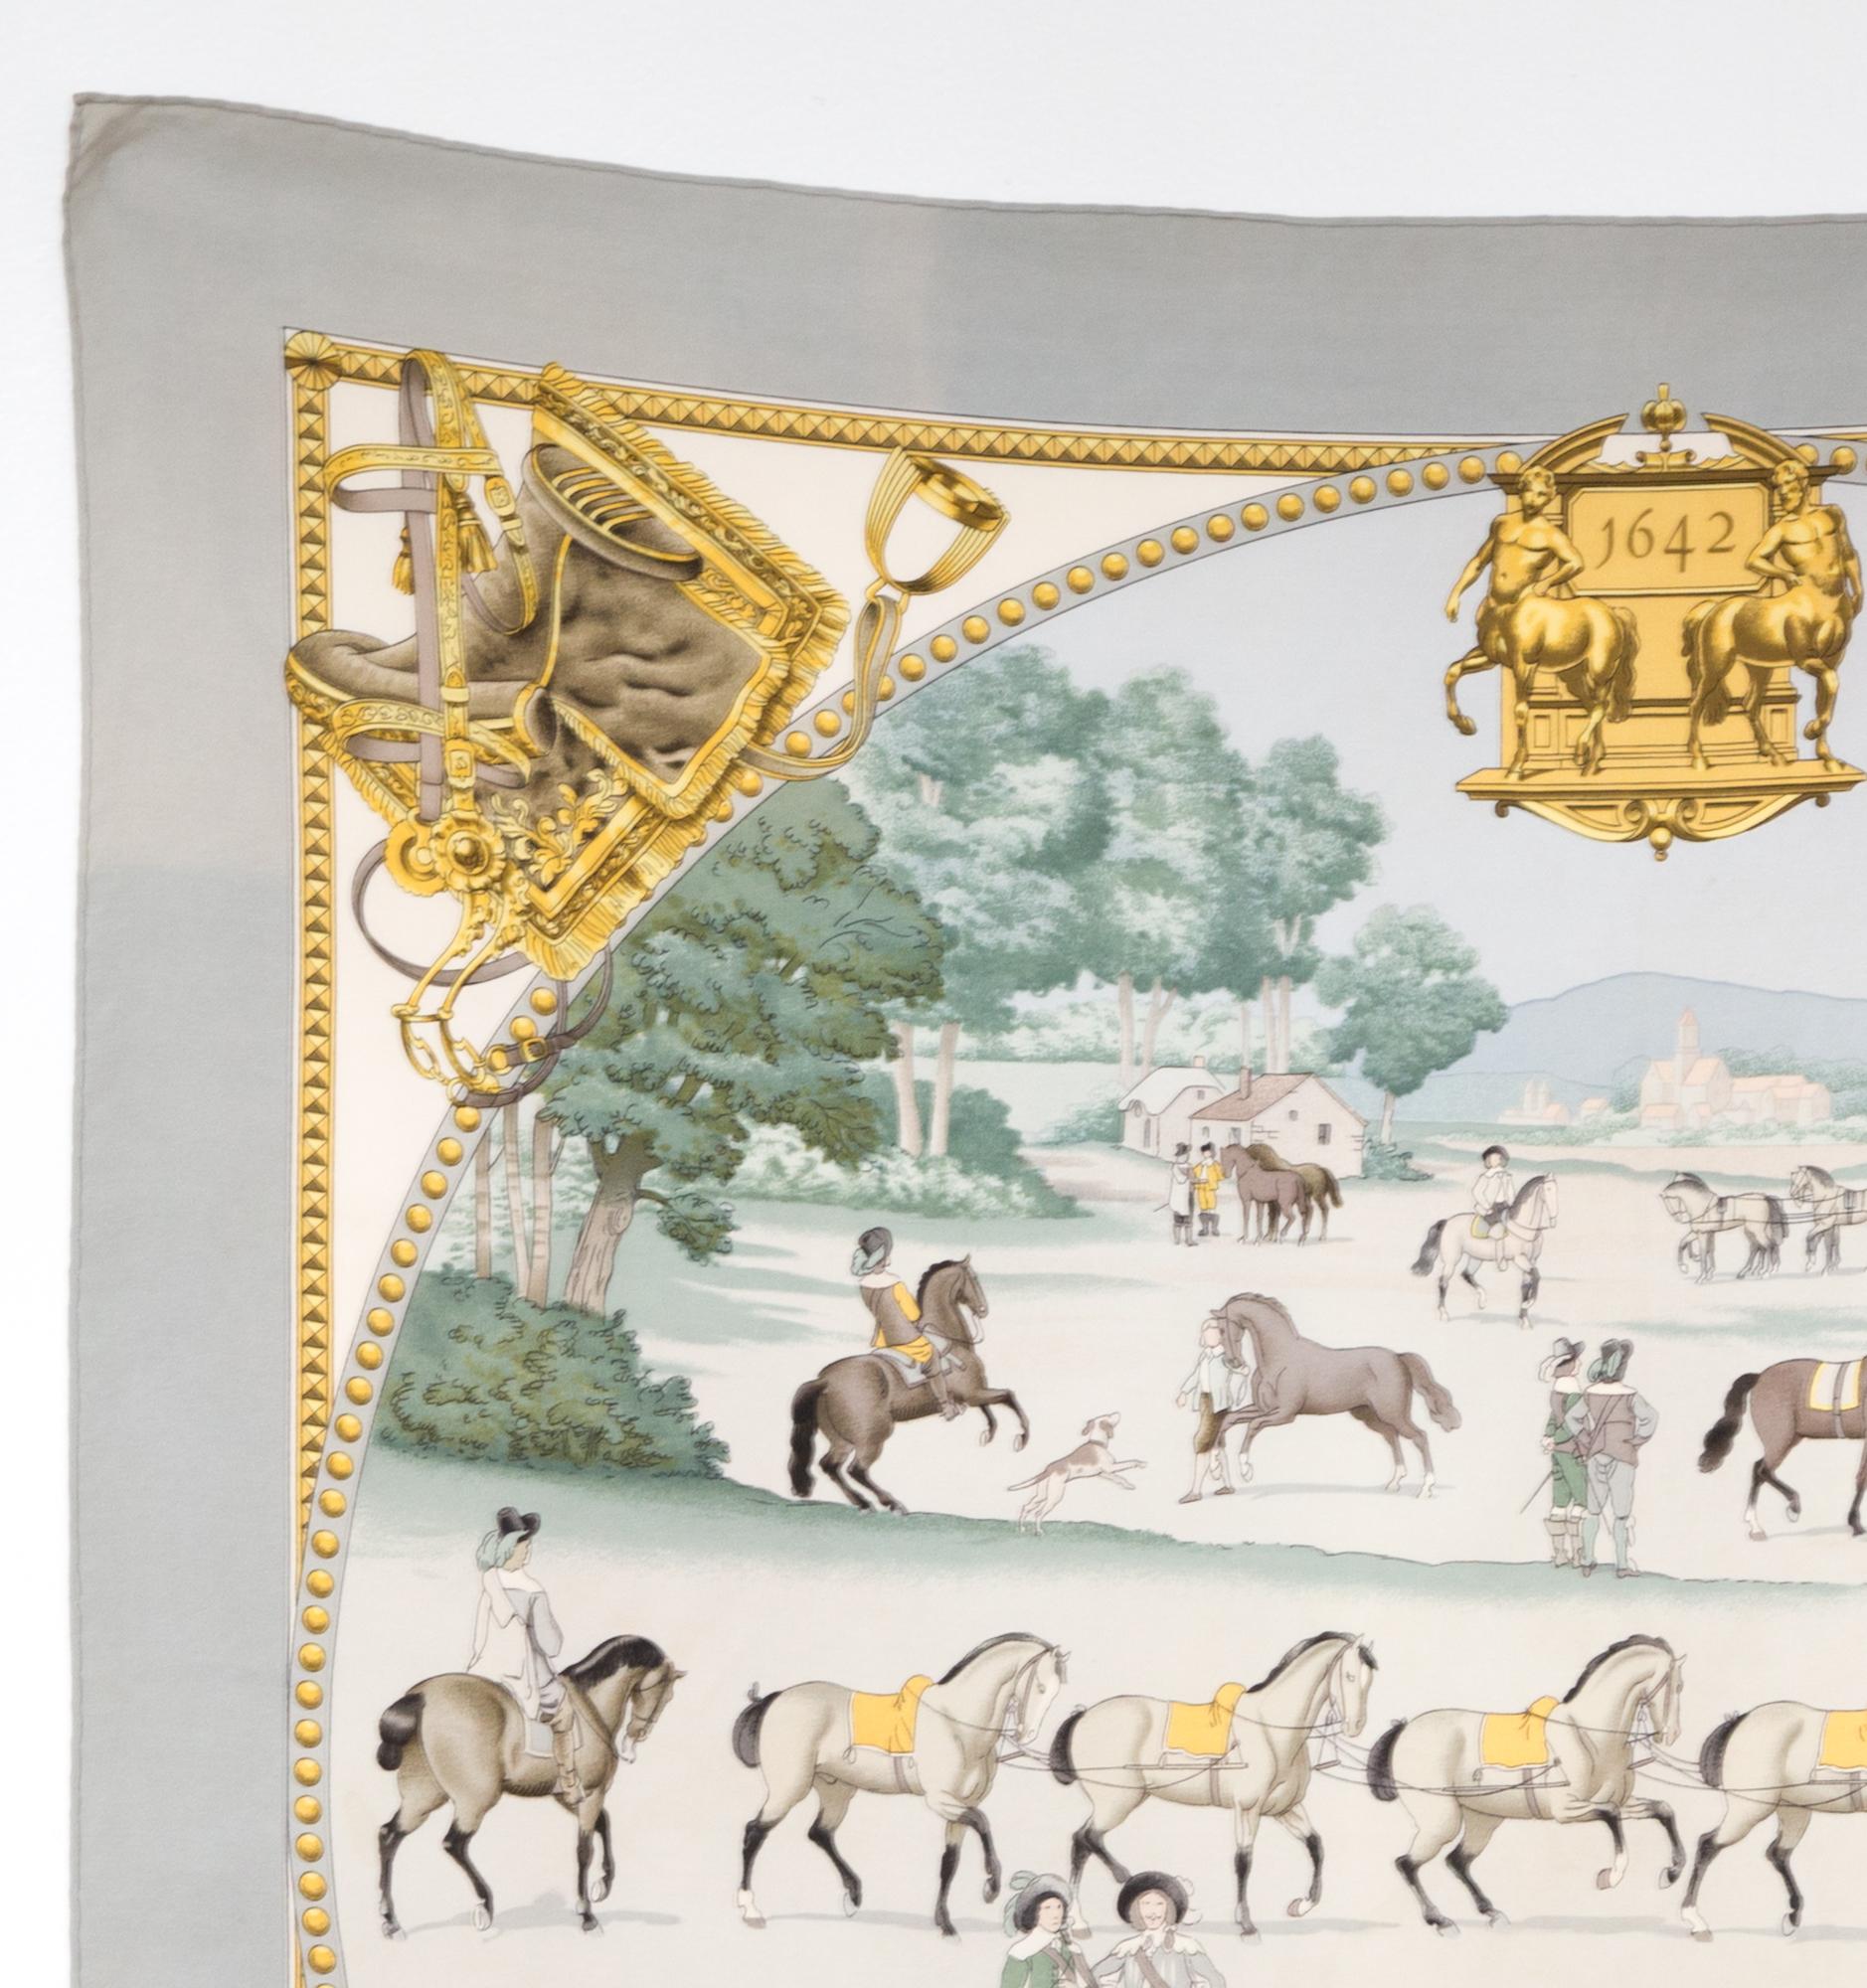 Hermes silk scarf 1642 Presentation de Chevaux by Philippe Ledoux featuring a grey border, a horse scene and a top signature.
In good vintage condition. Made in France.
First edition 1970
35,4in. (90cm)  X 35,4in. (90cm)
We guarantee you will